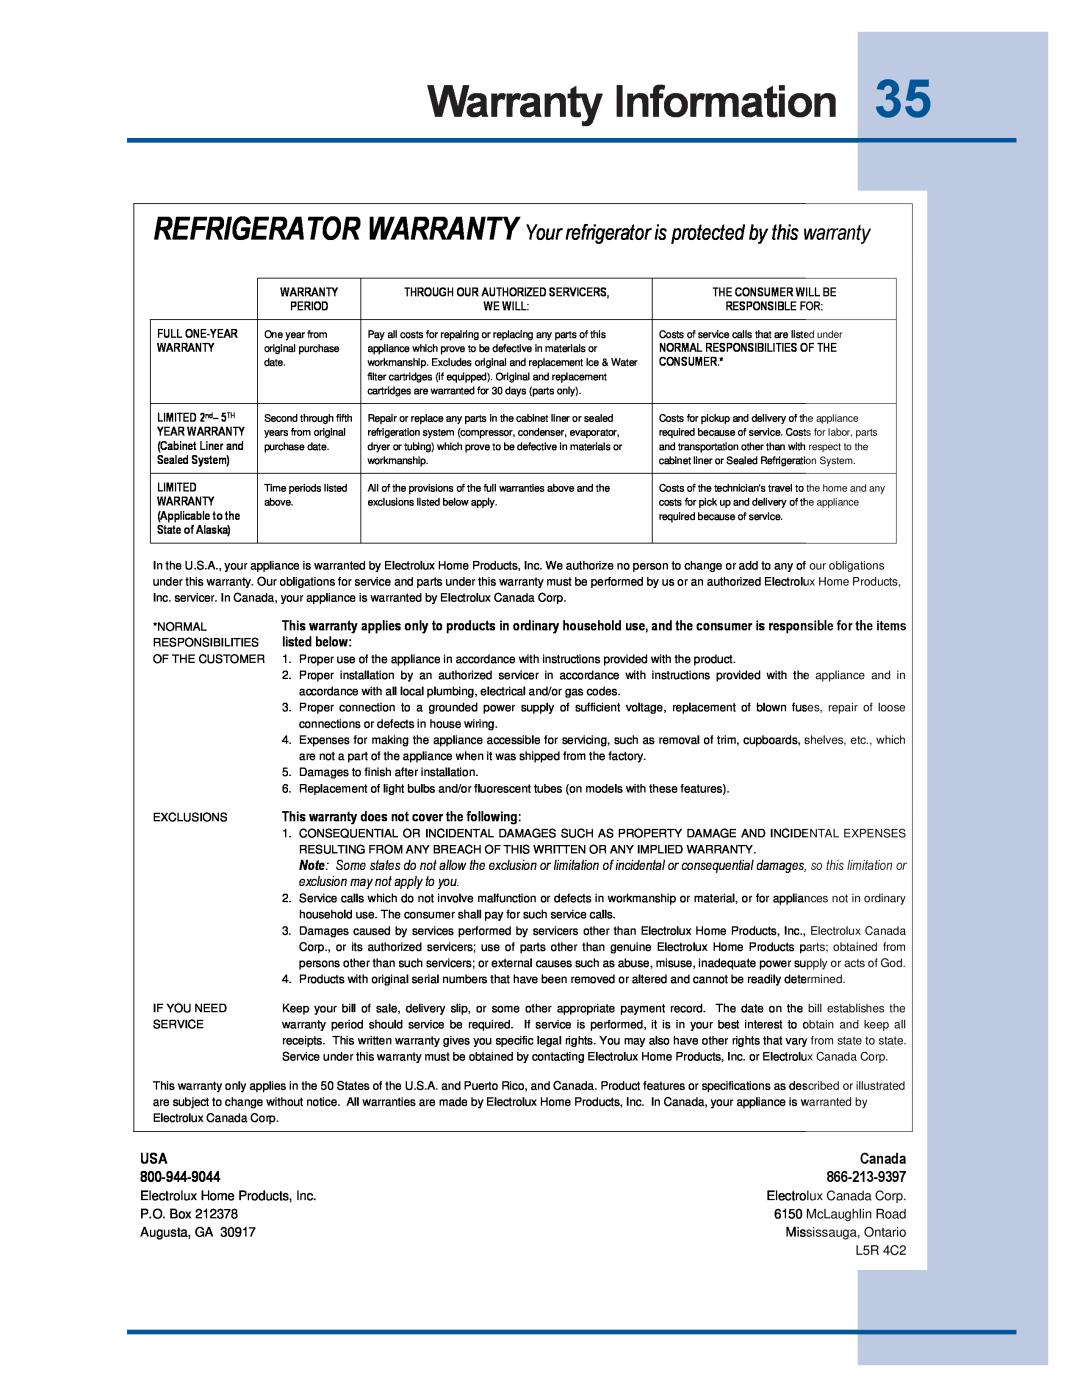 Electrolux 241540102 Warranty Information, REFRIGERATOR WARRANTY Your refrigerator is protected by this warranty, Canada 